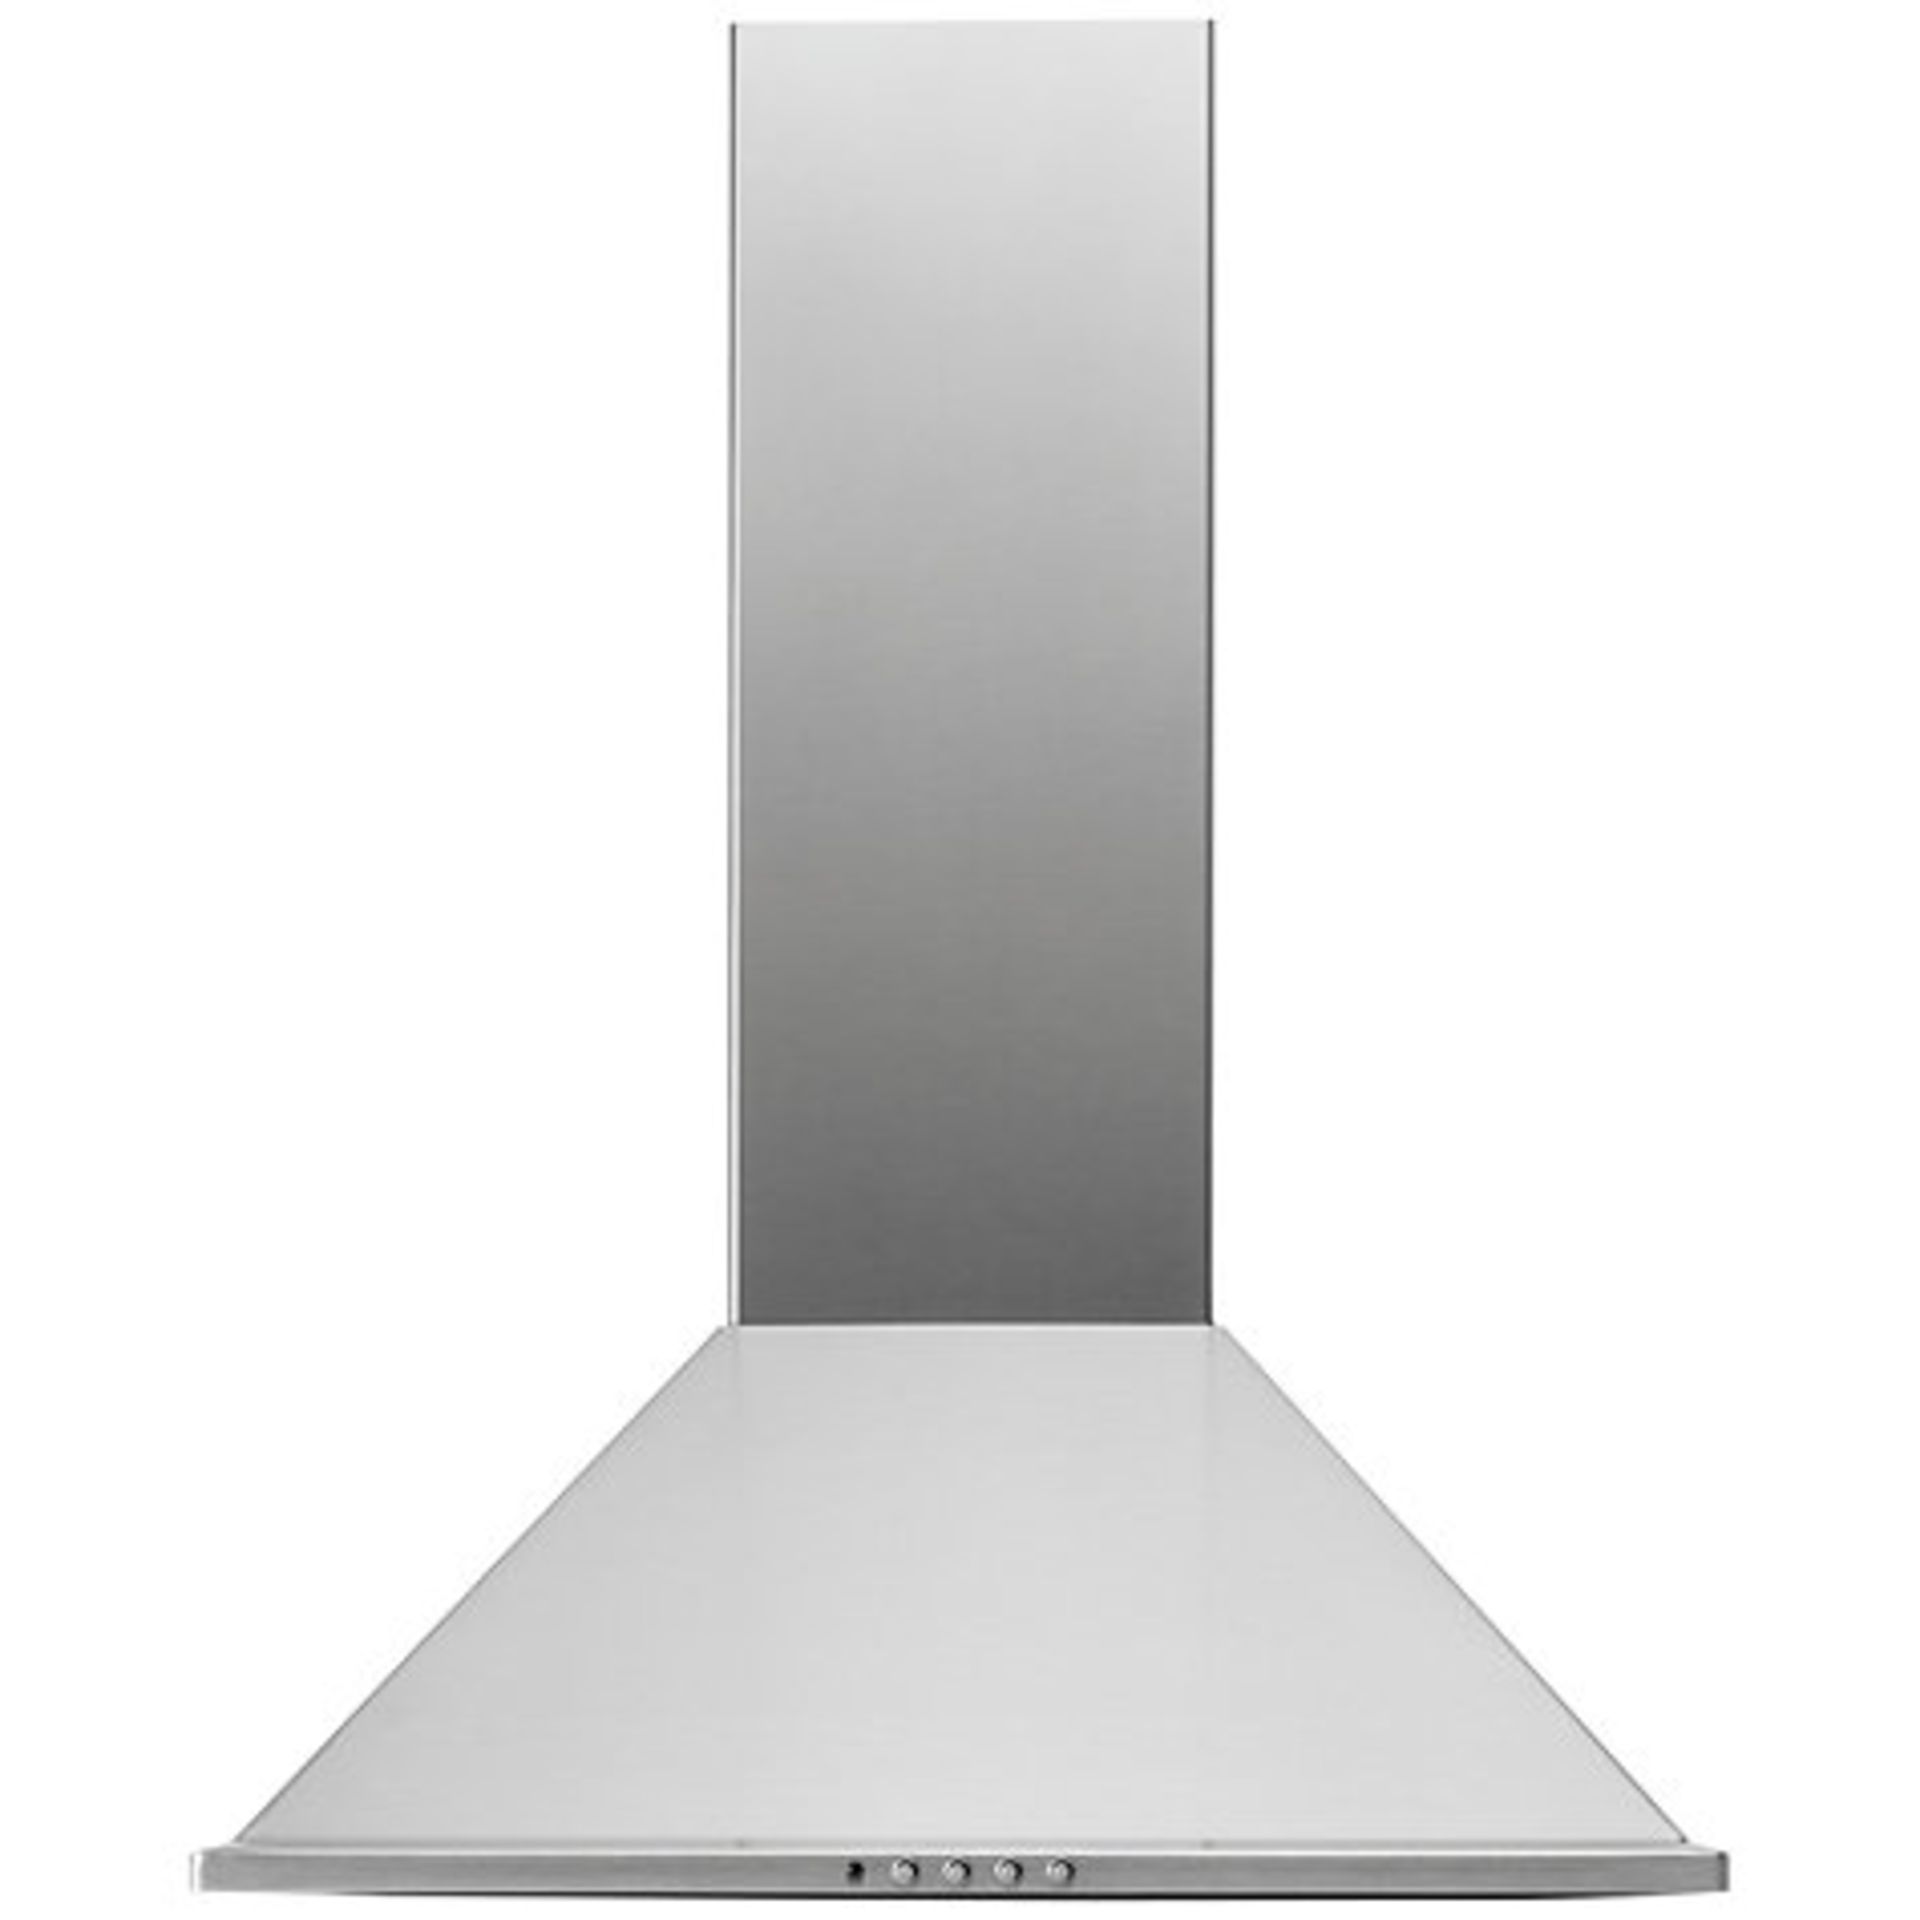 1 x BOXED ELICA 90CM COOKER HOOD RRP £285   *PLEASE NOTE THAT THE BID PRICE IS MULTIPLIED BY THE